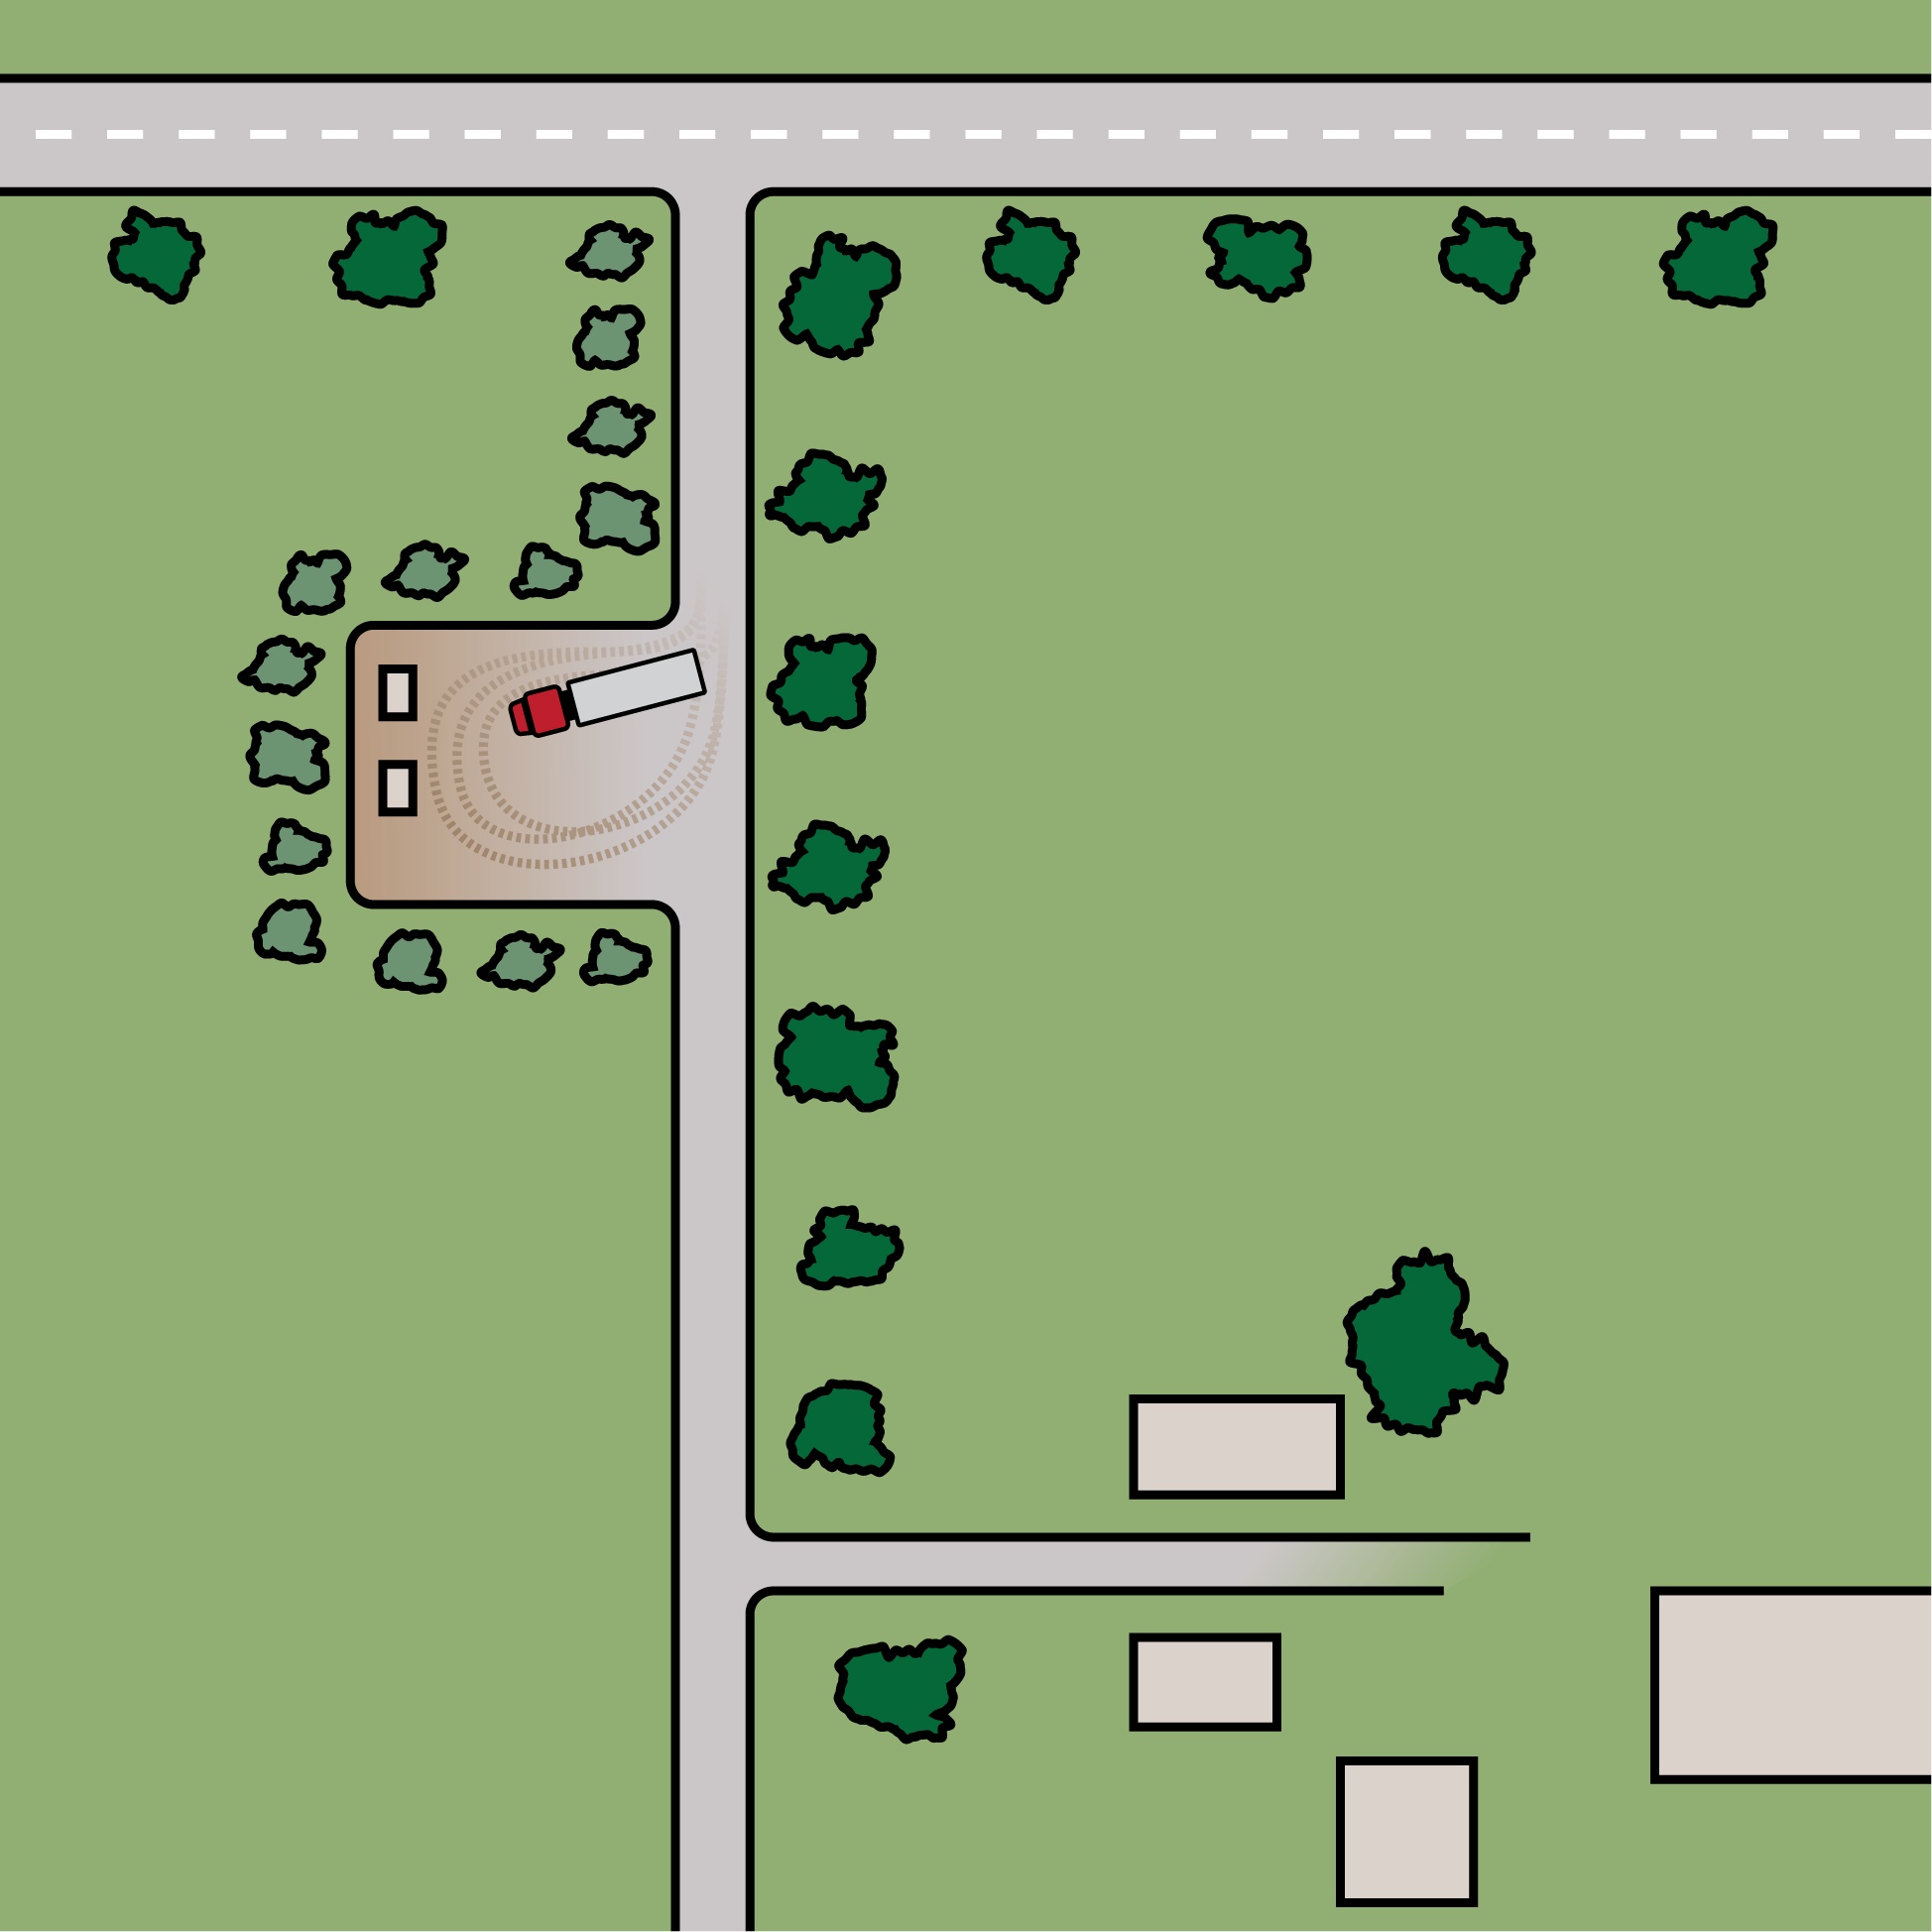 Illustration of a farmstead showing the storage and pick-up area for deadstock. The site is mid-way down the laneway surrounded by trees so as to protect it from public view.